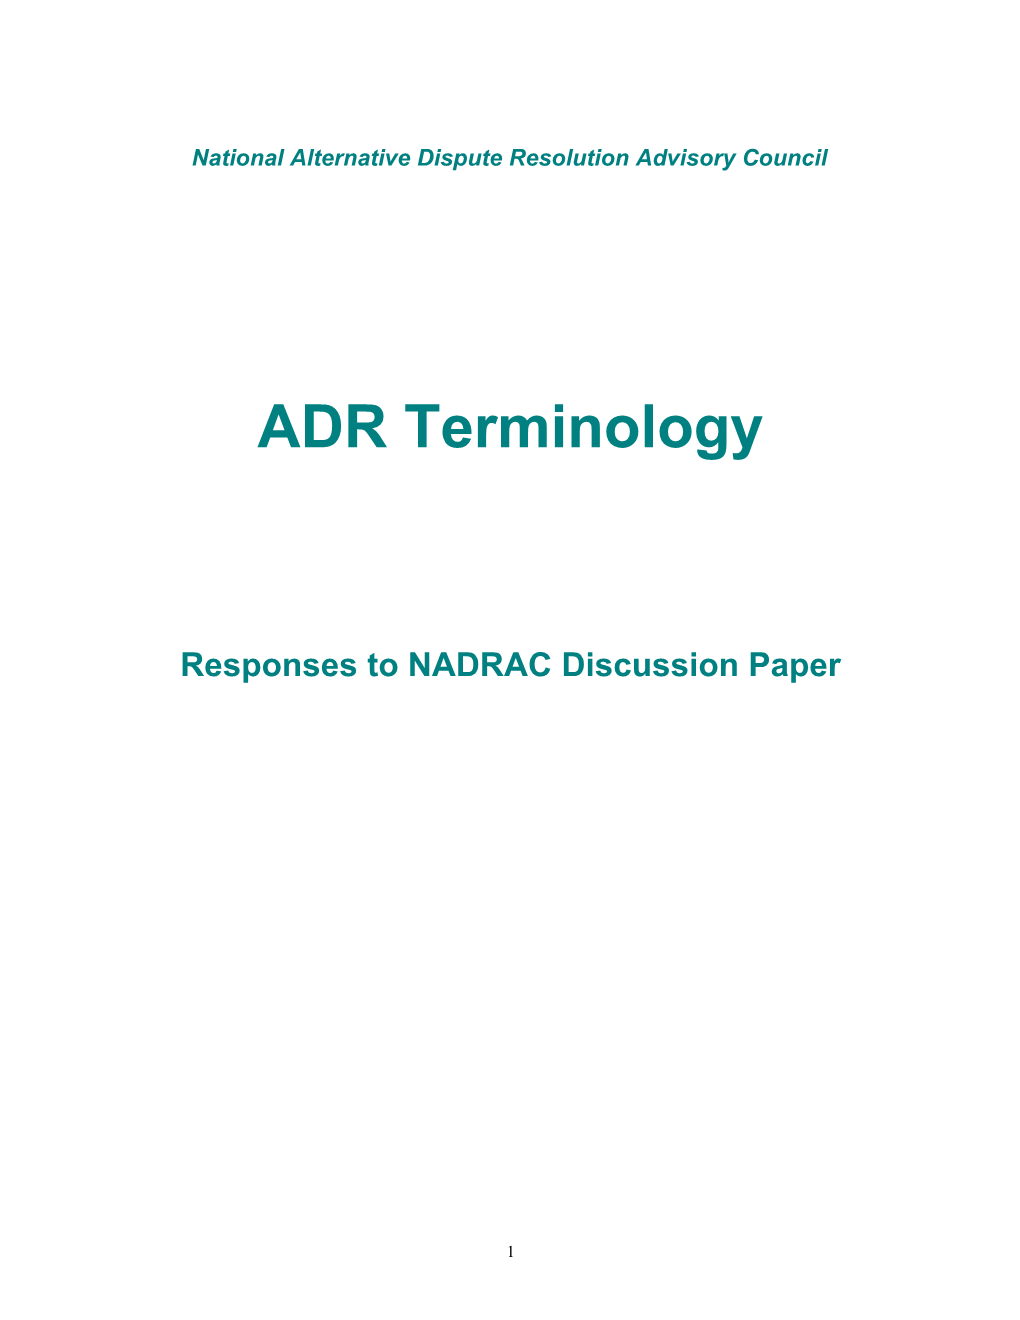 ADR Terminology Responses to NADRAC Discussion Paper